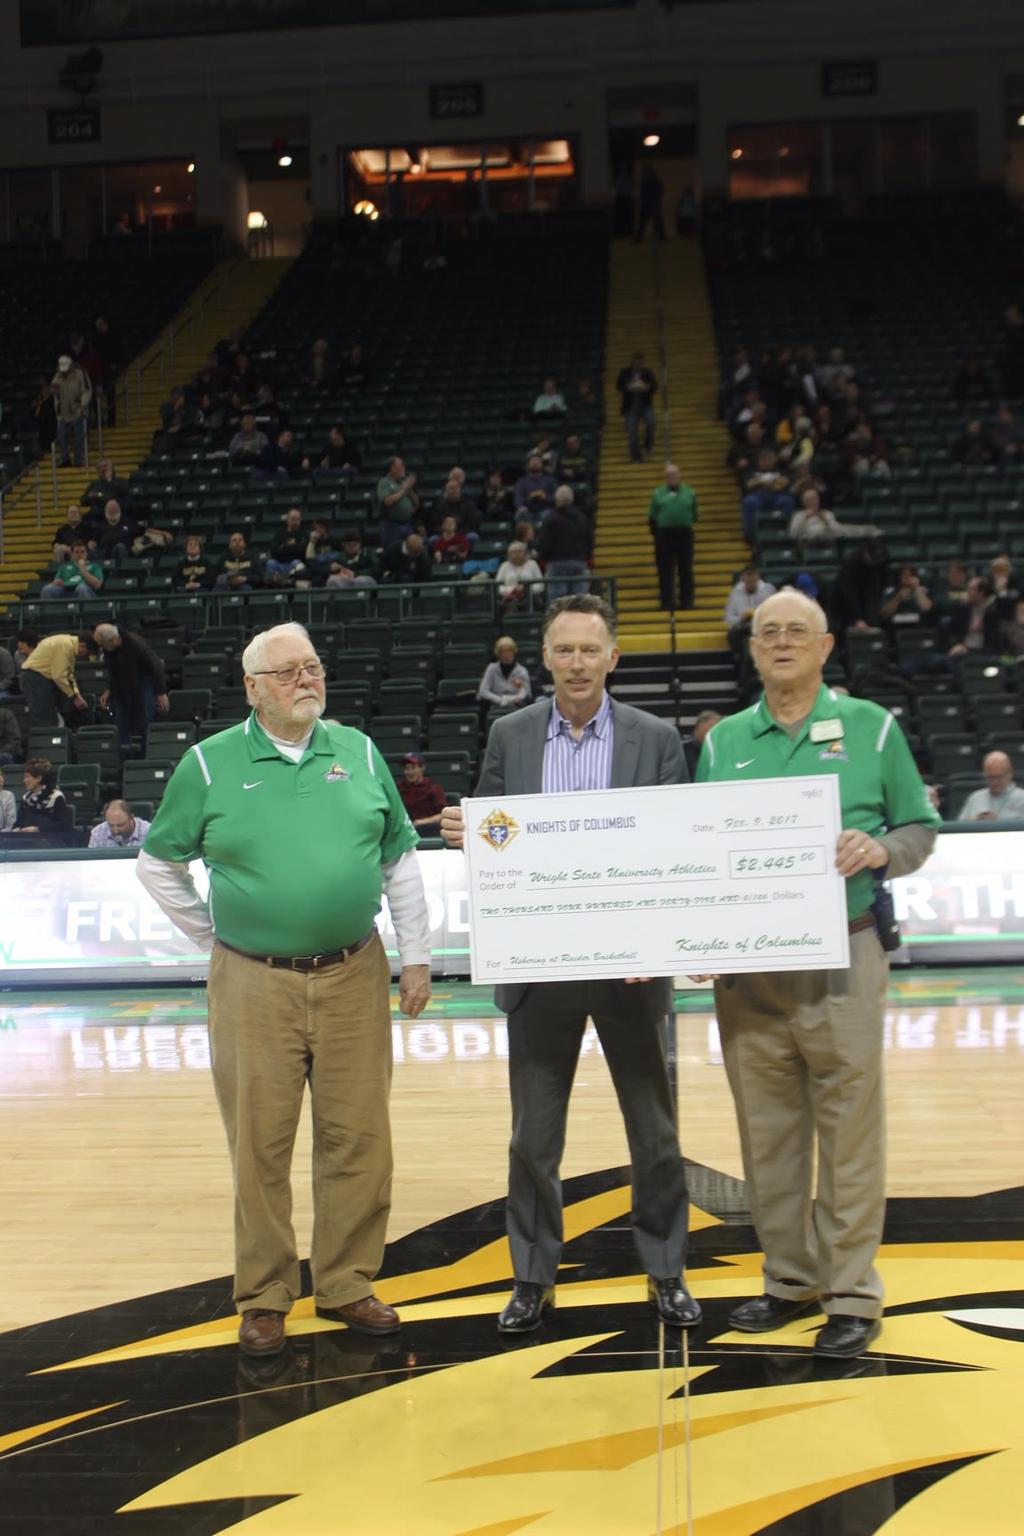 Council 3724 Ushers Receiving Award Check during the Wright State Basketball Game MEMBERSHIP We have only three months to reach our goal, June doesn't count.